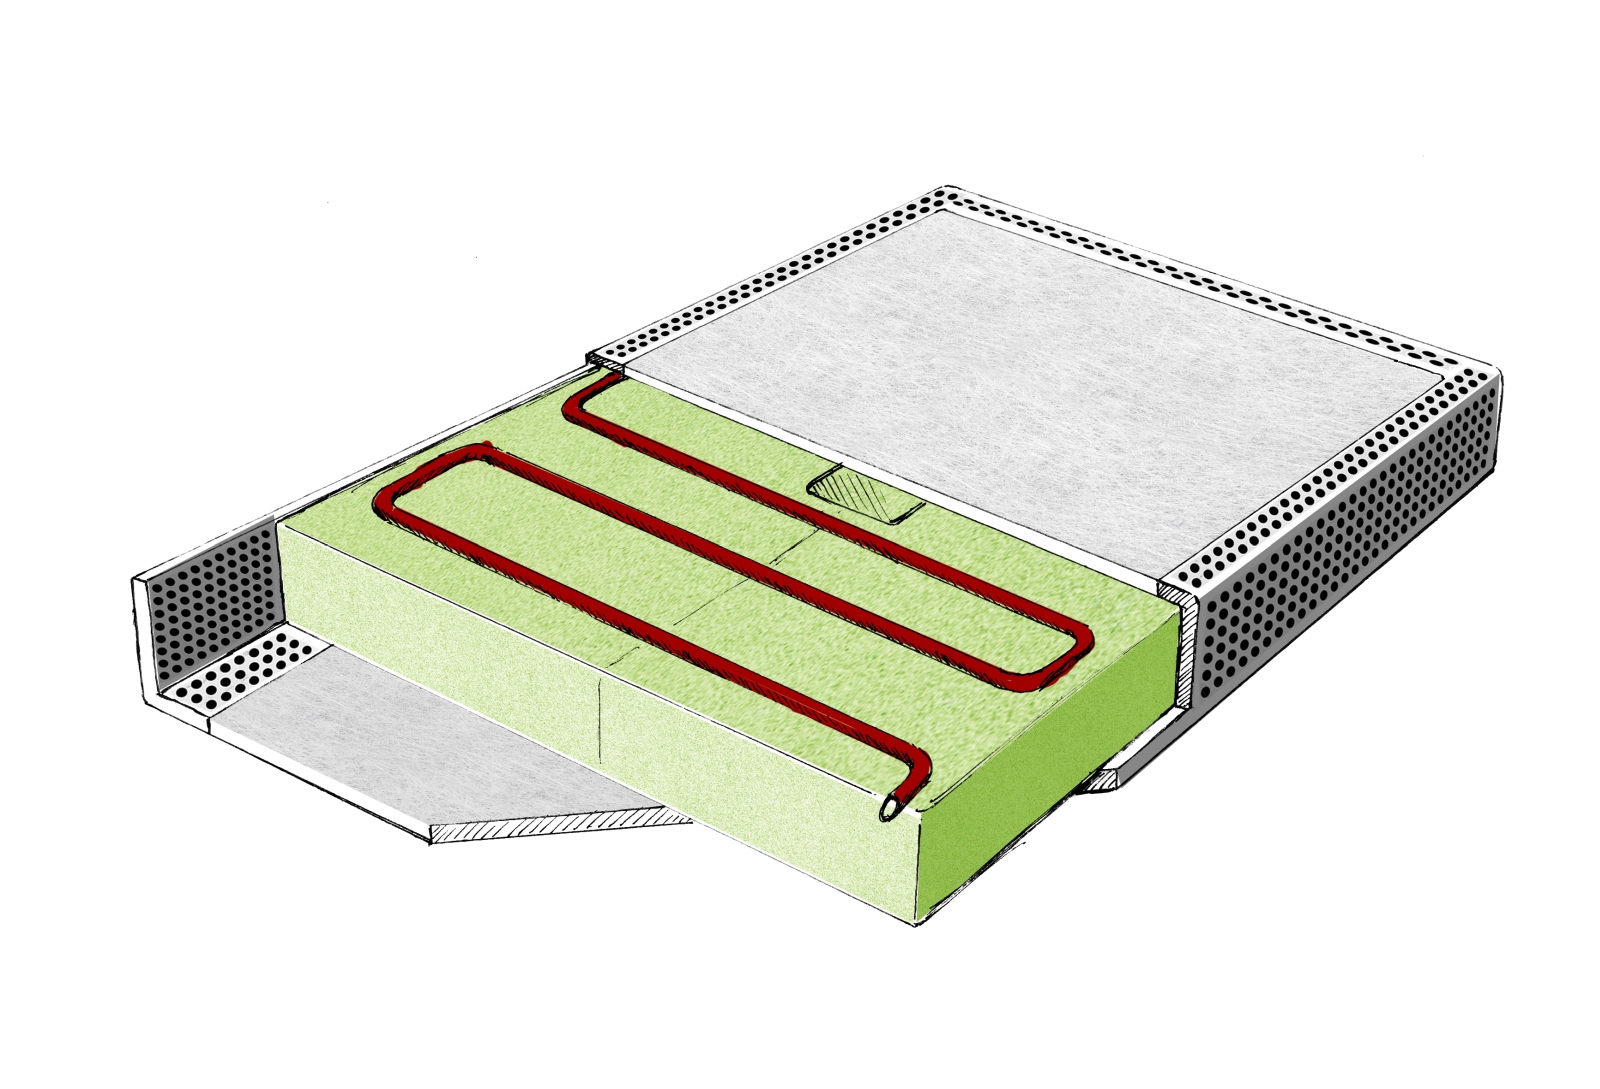 The layout of the drying module: The heating wire is embedded in non-flammable mineral fiber. The water vapor emitted can dissipate through the permeable material.